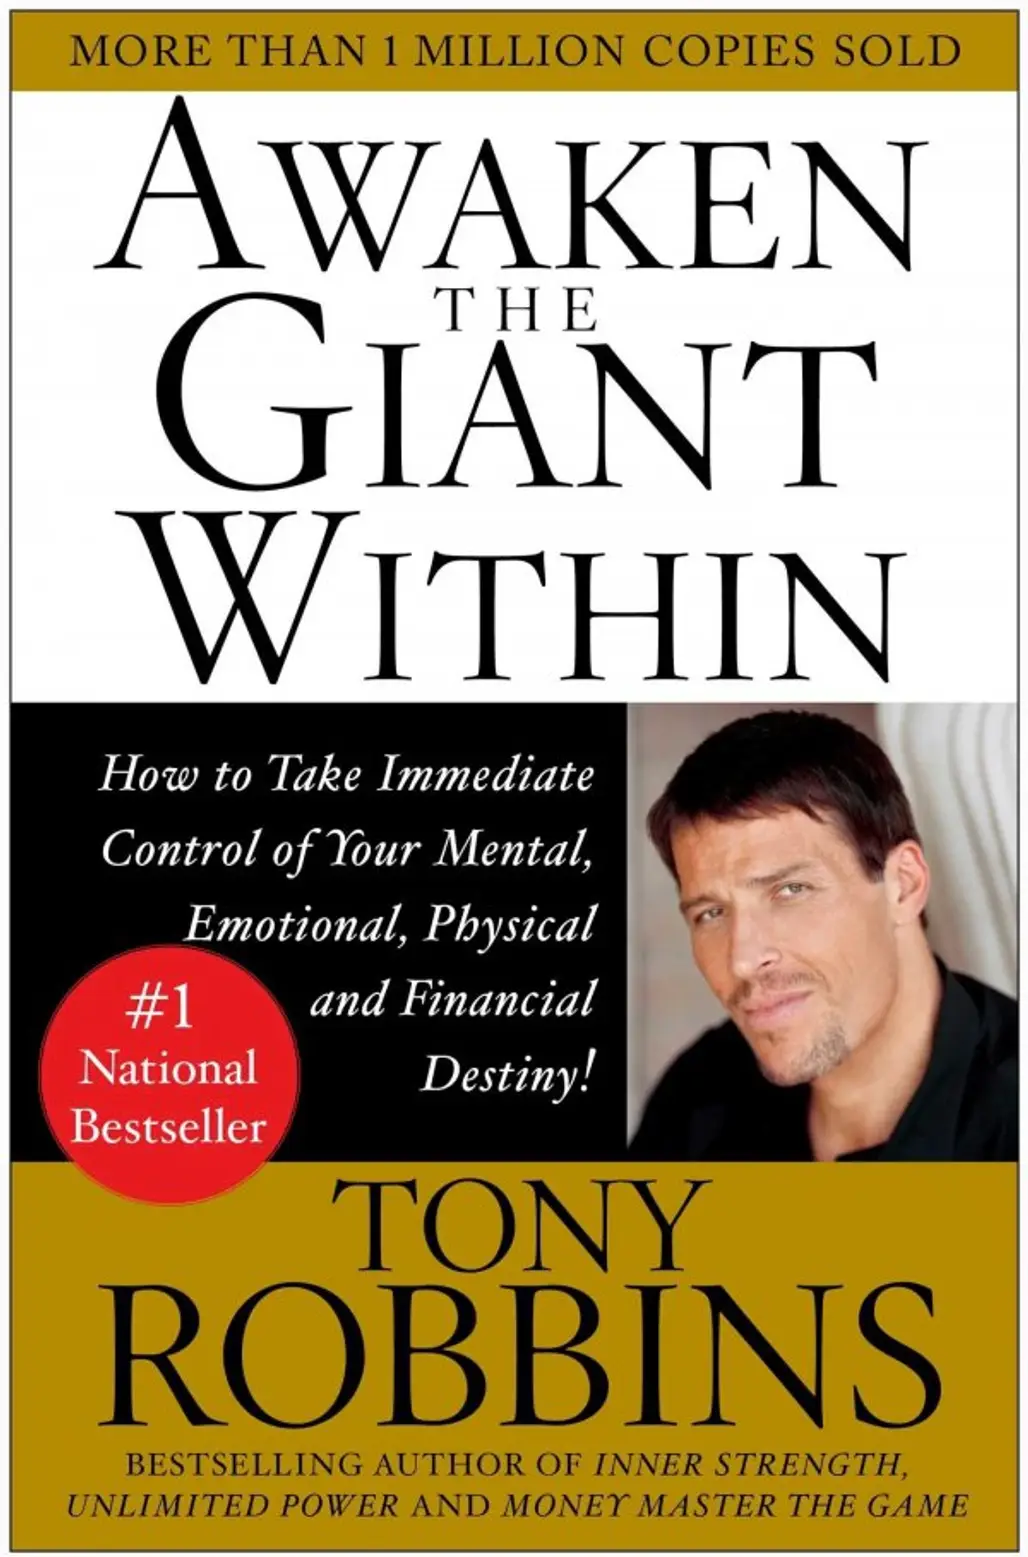 Awaken the Giant within: How to Take Immediate Control of Your Mental, Emotional, Physical and Financial Destiny! – Tony Robbins